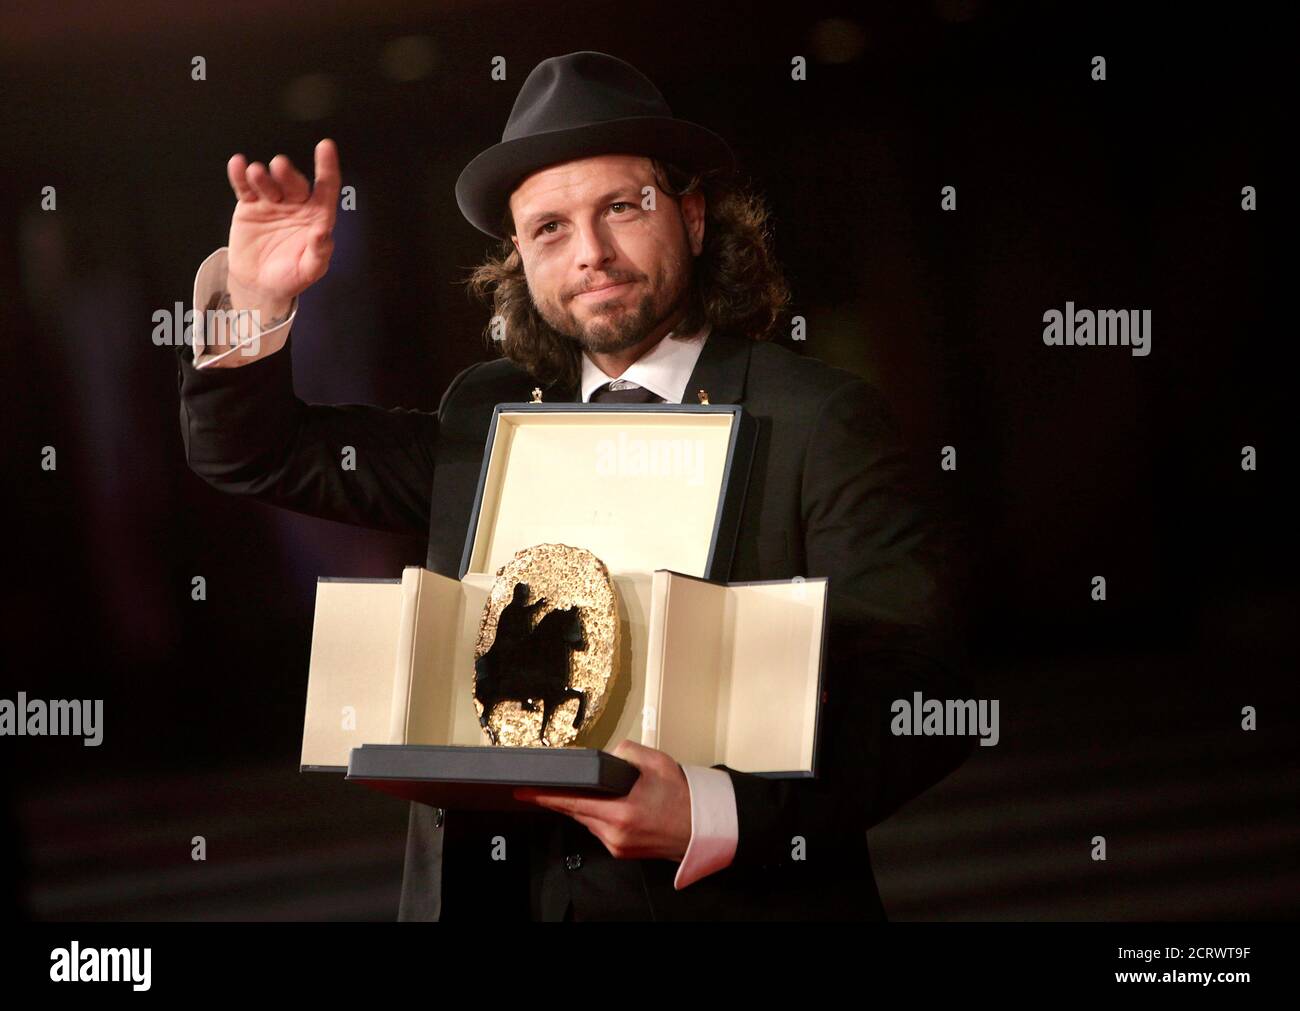 Danish director Nicolo Donato poses with his award on the red carpet at the Rome Film Festival October 23, 2009. Donato received the Golden Marc'Aurelio jury award for best film 'Brotherhood'. REUTERS/Tony Gentile  (ITALY ENTERTAINMENT) Stock Photo